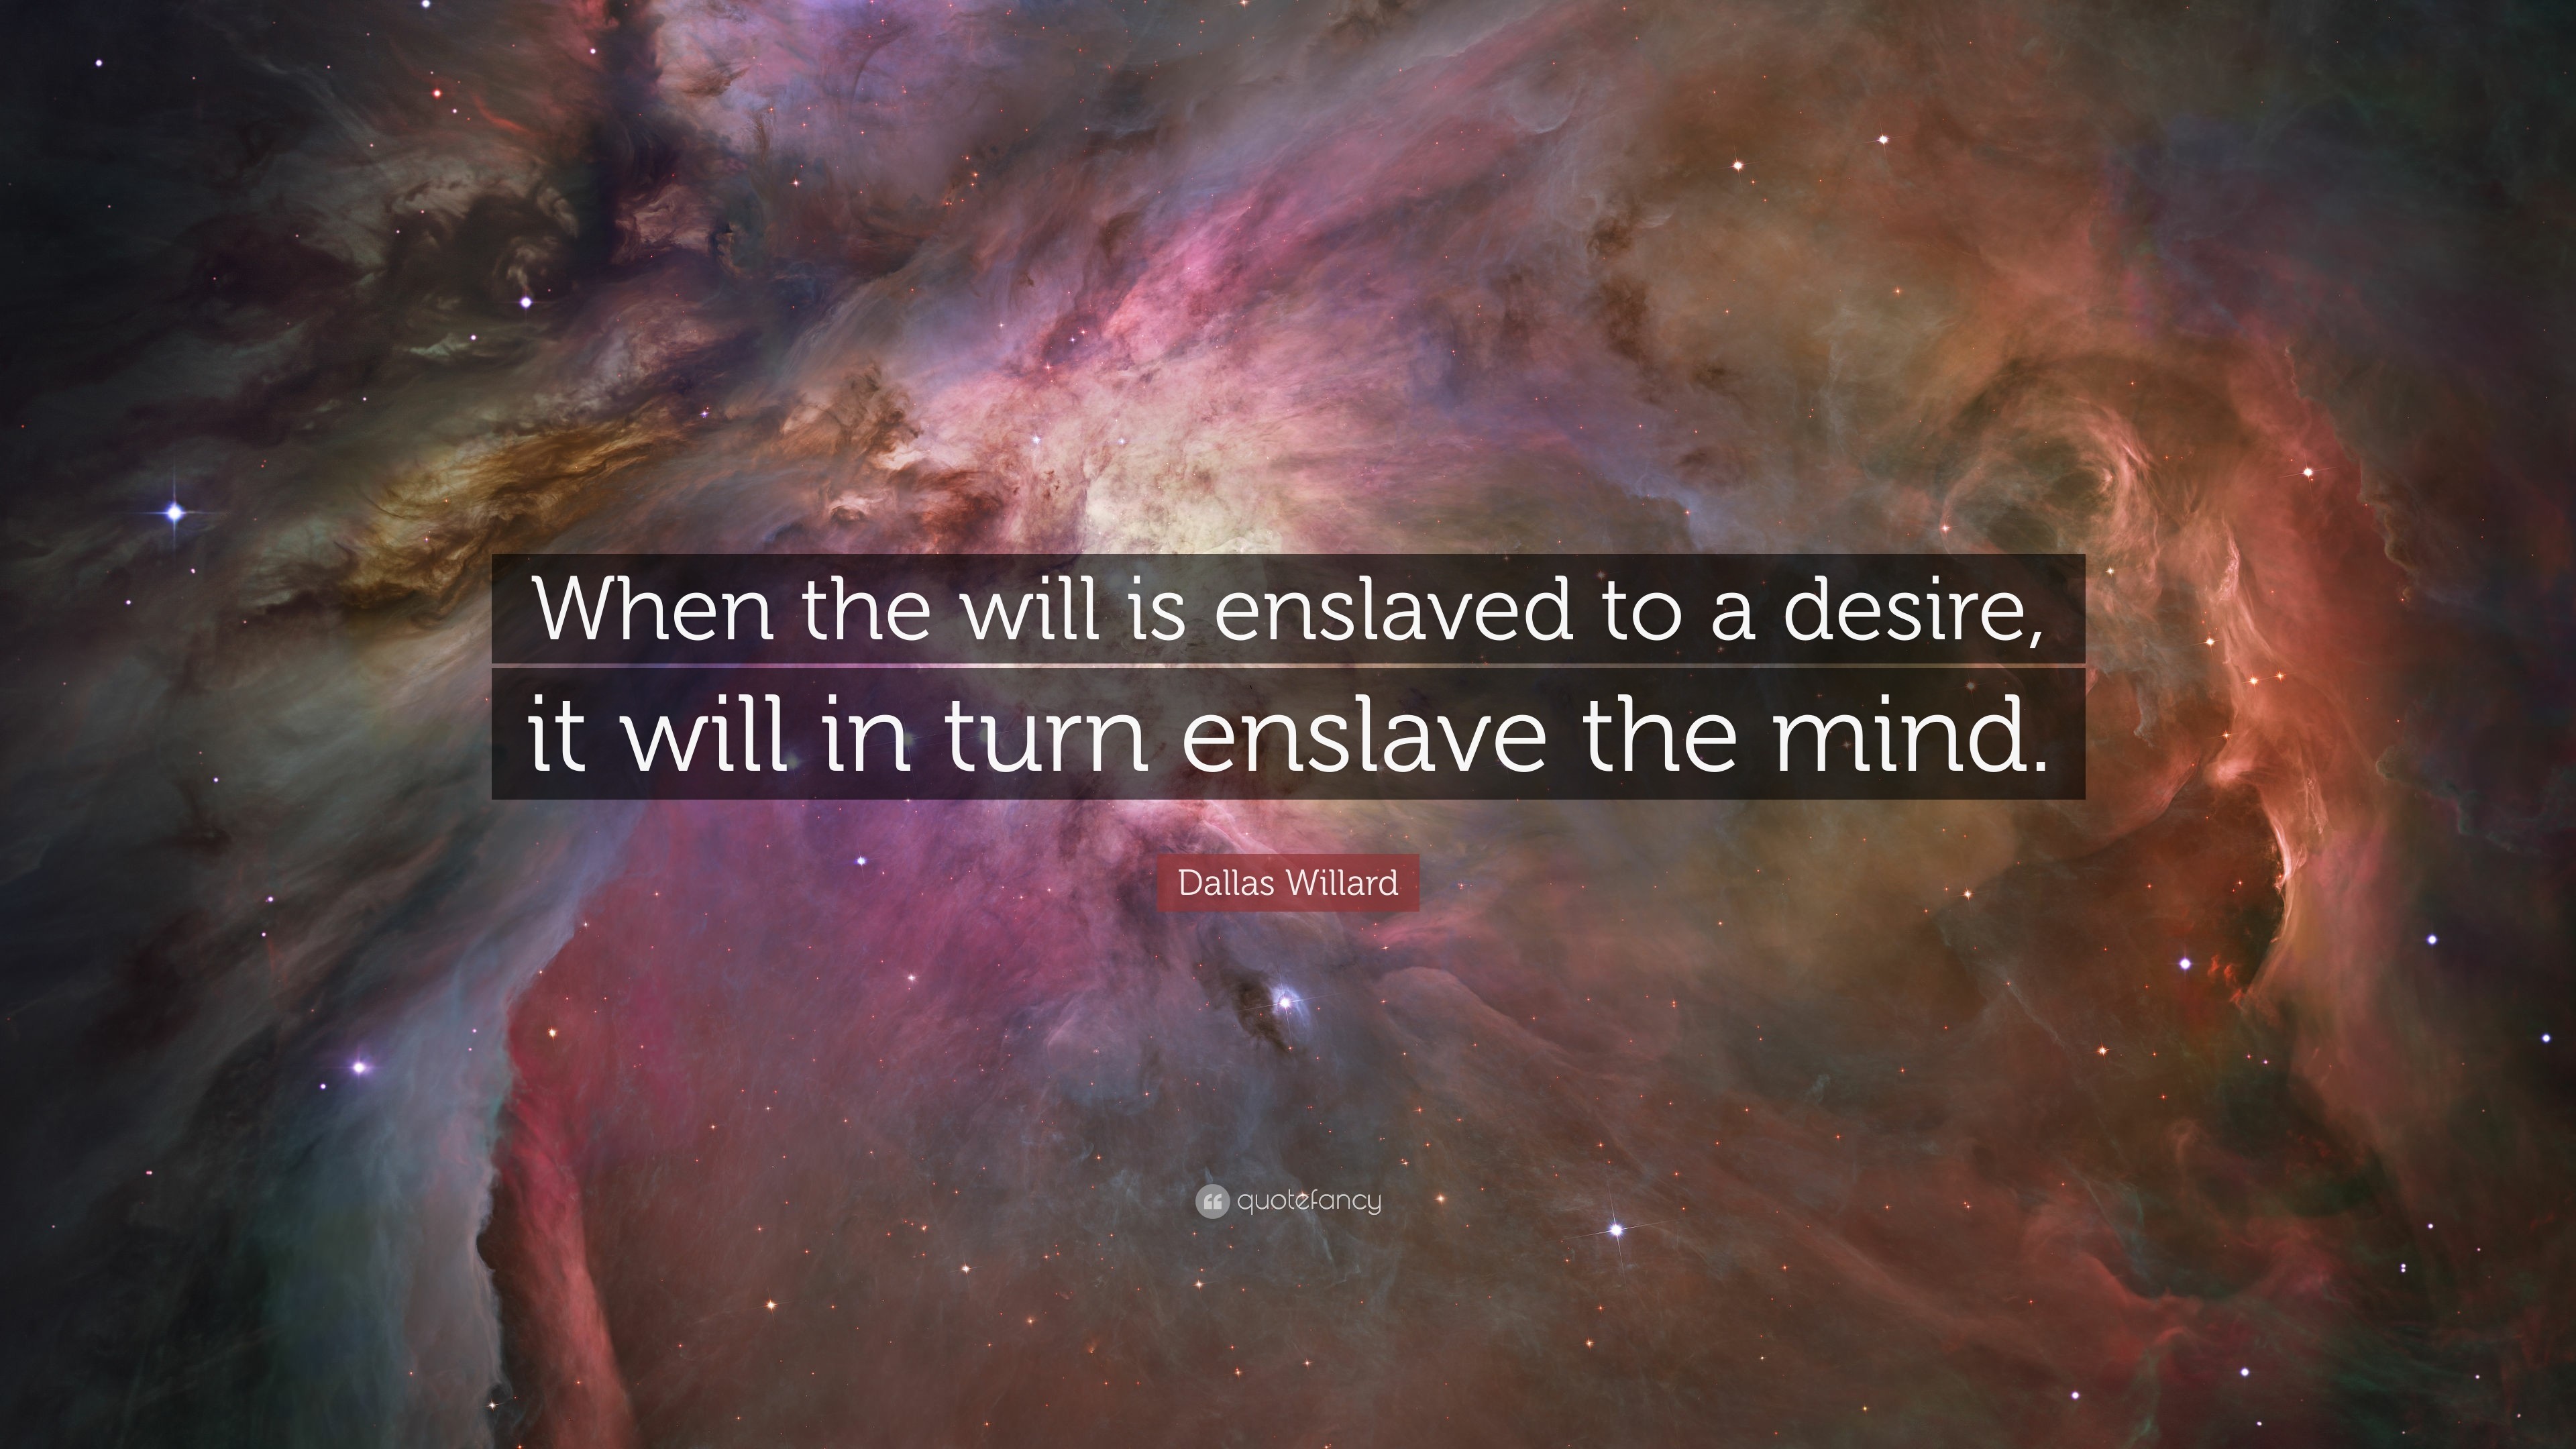 3840x2160 Dallas Willard Quote: “When the will is enslaved to a desire, it will